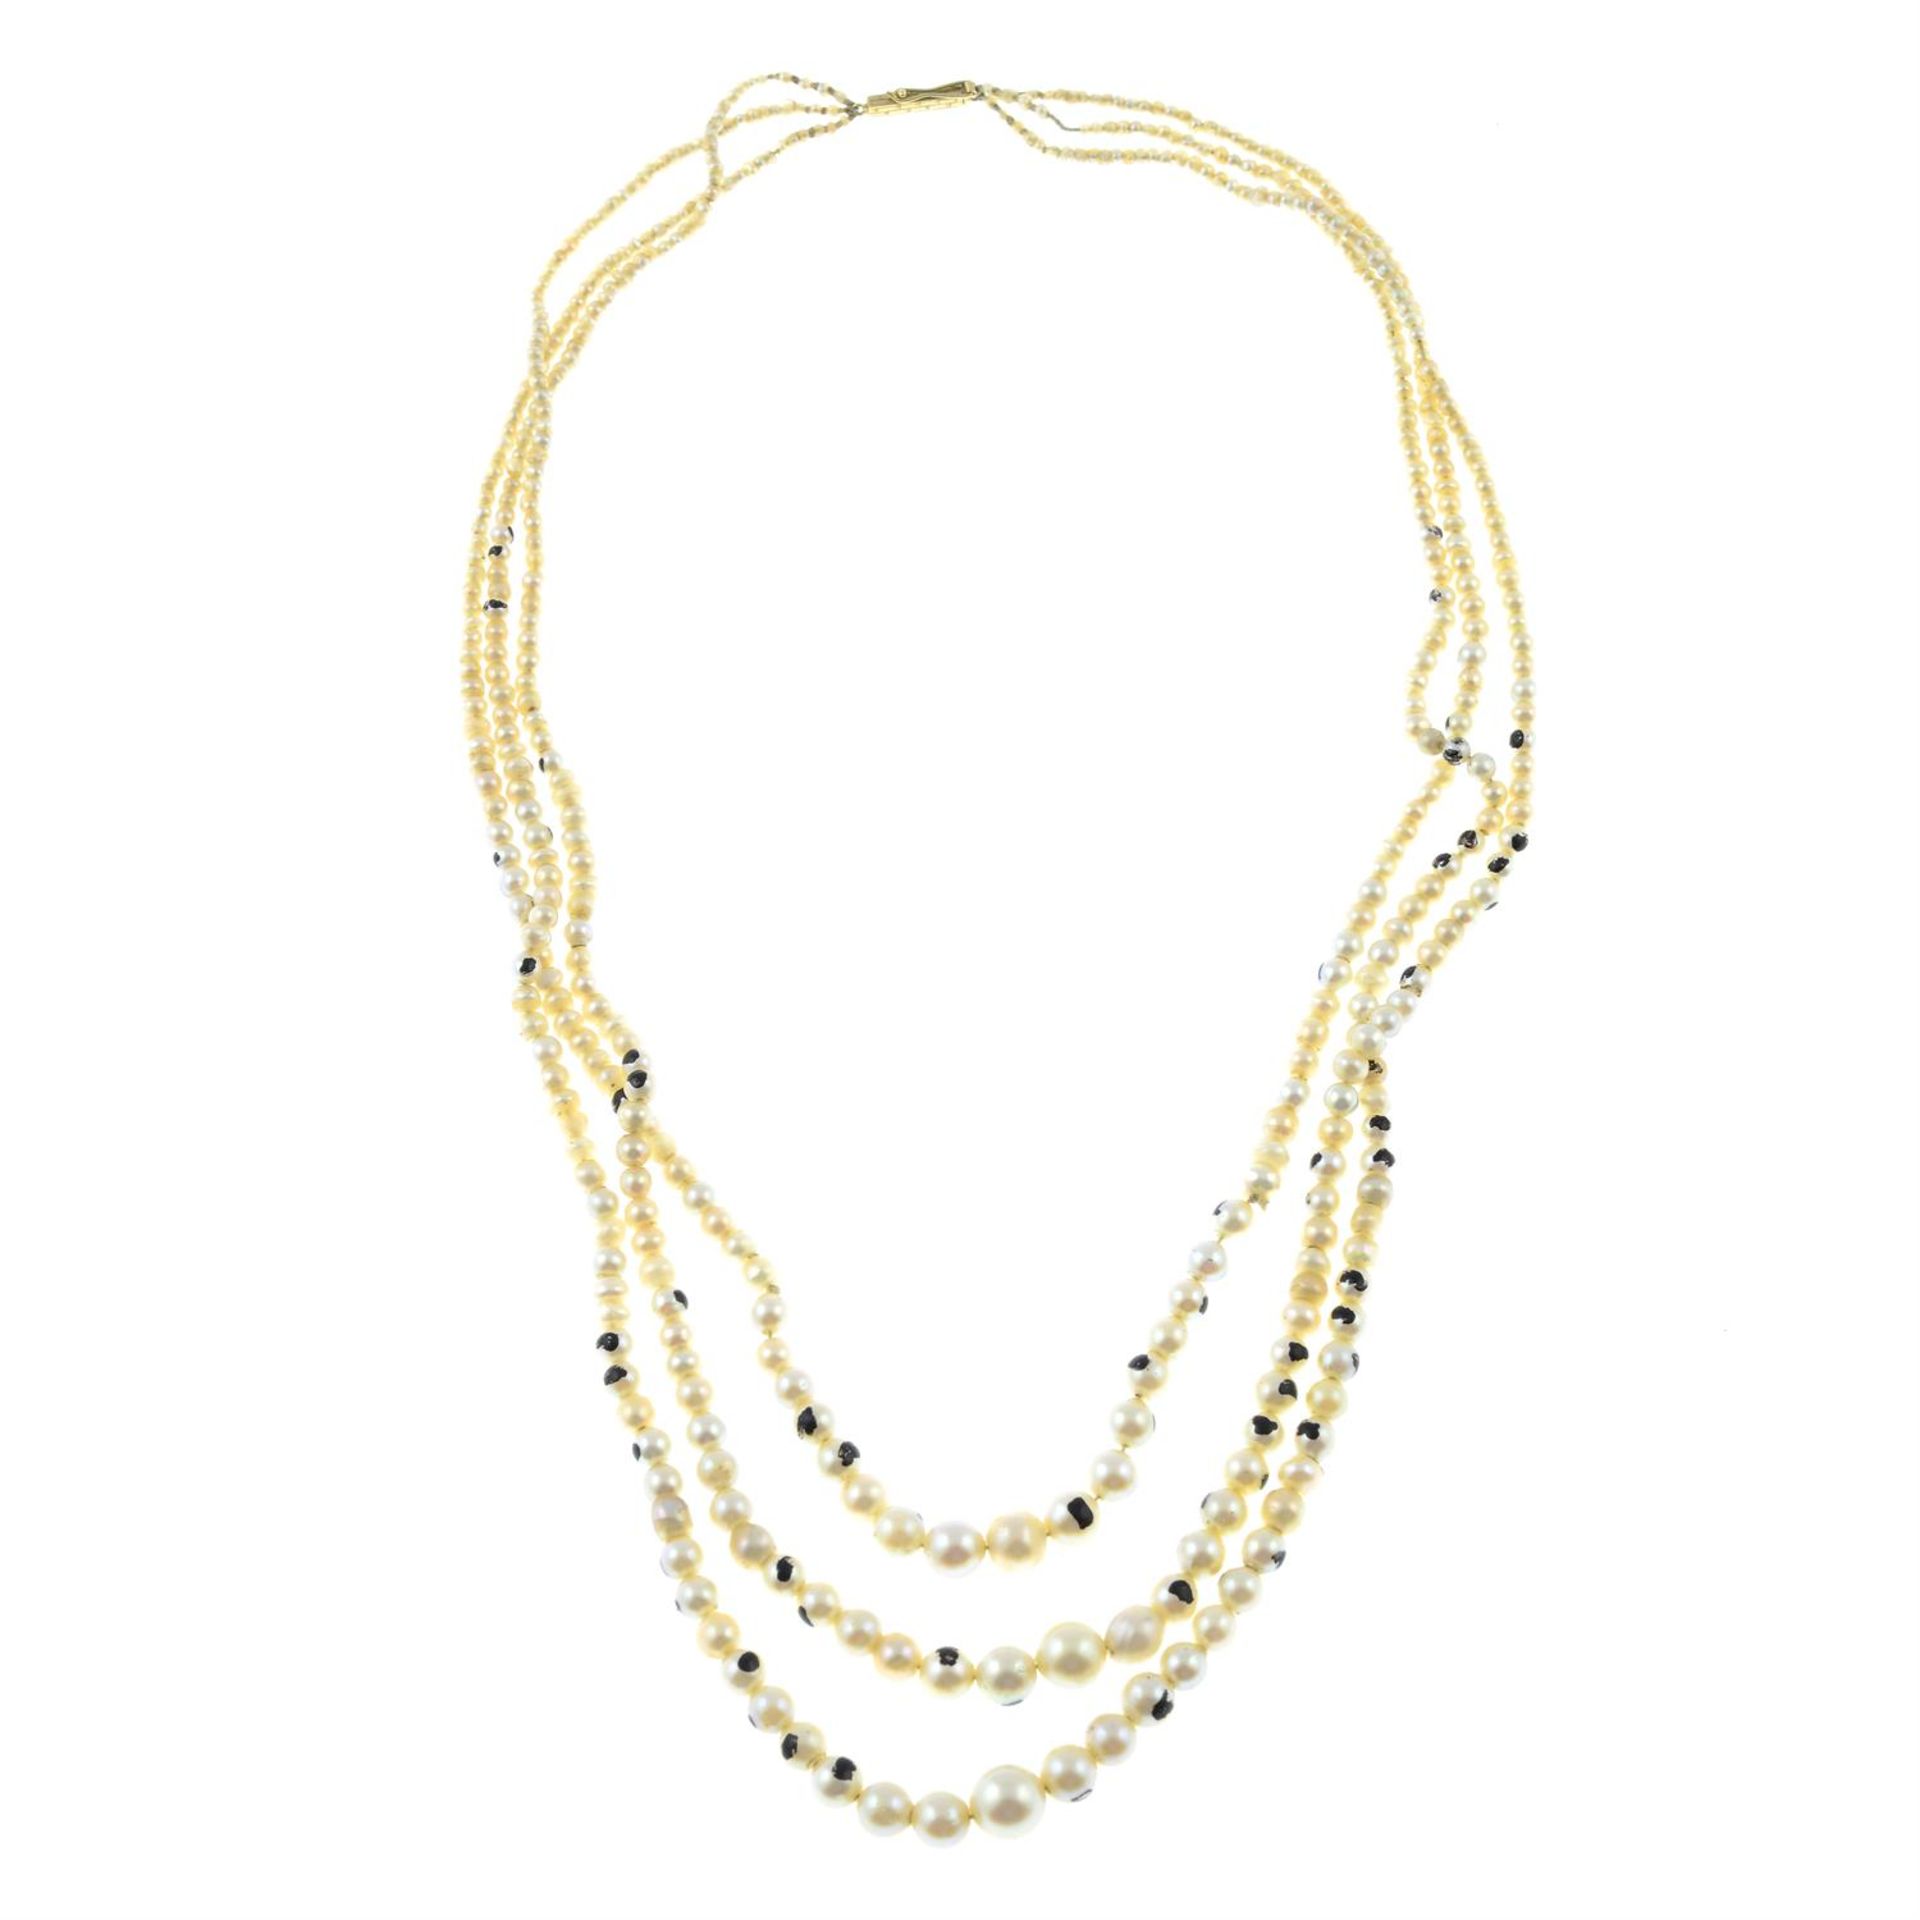 An early 20th century graduated natural, cultured and imitation pearl three-strand necklace.